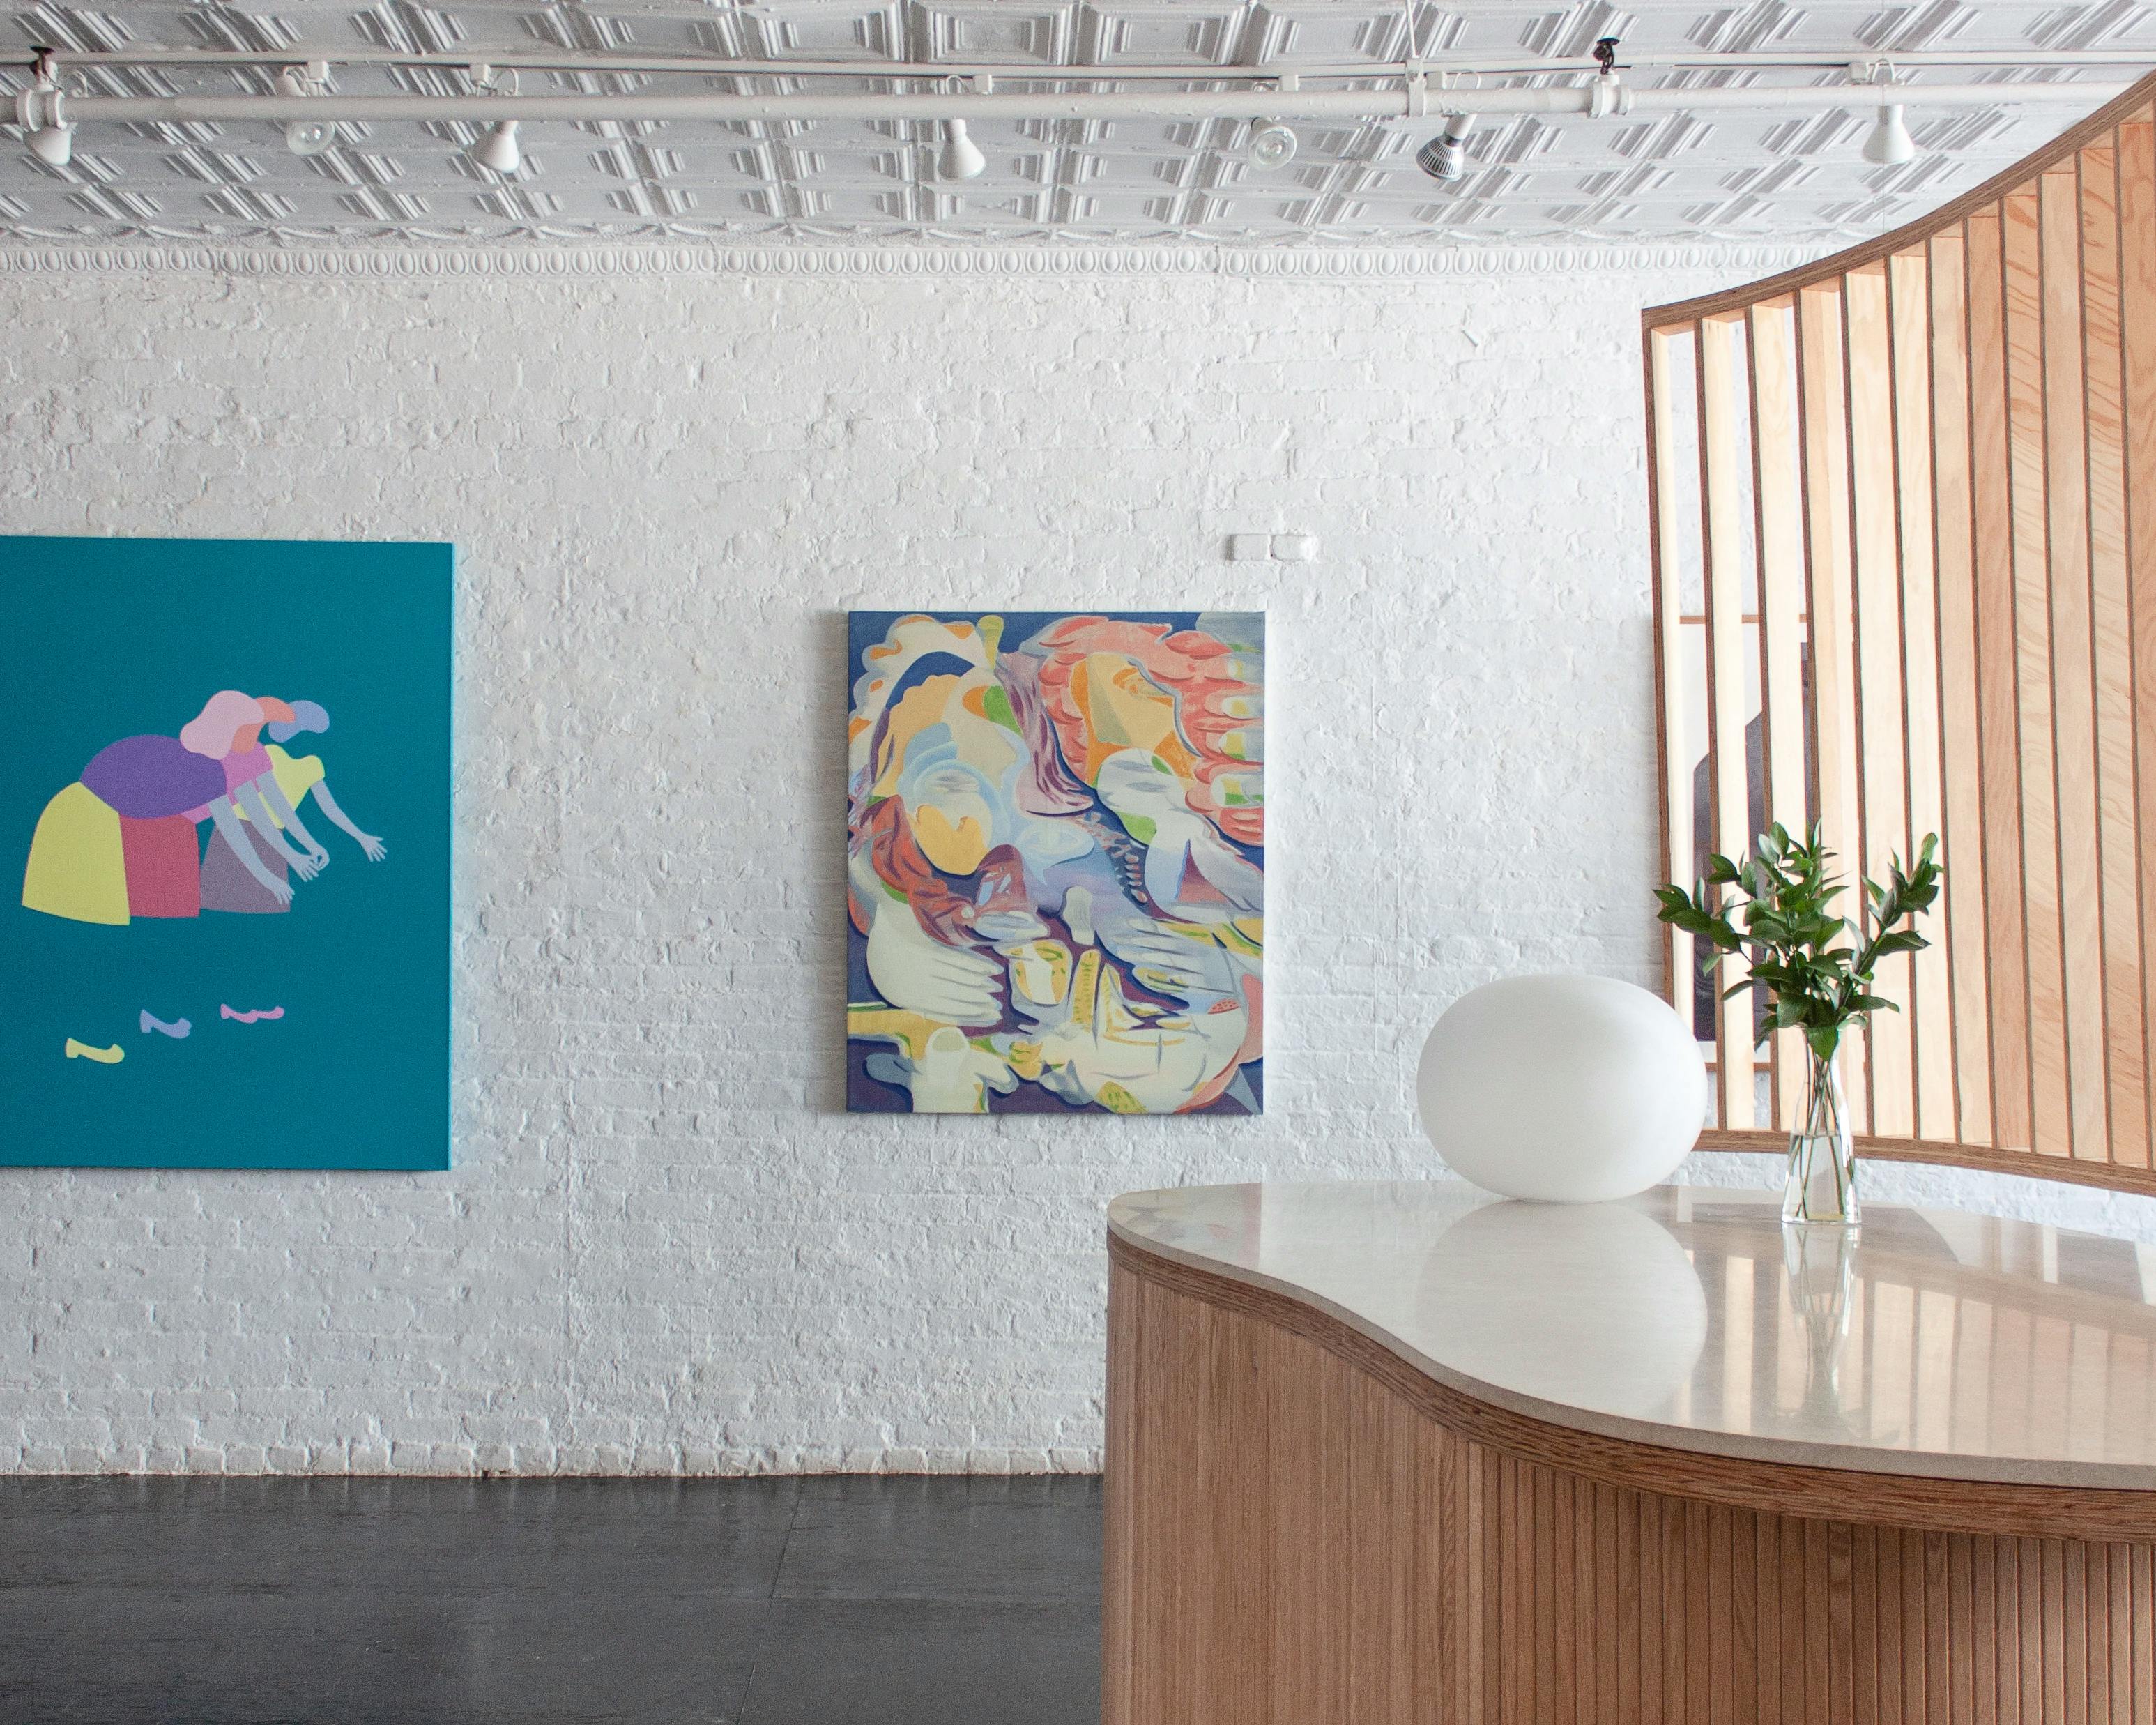 A teal painting of characters reaching by Dana Bell next to a multicolored abstract figure by Trina Turturici installed on a white wall at Uprise Art for the Figurative collection.